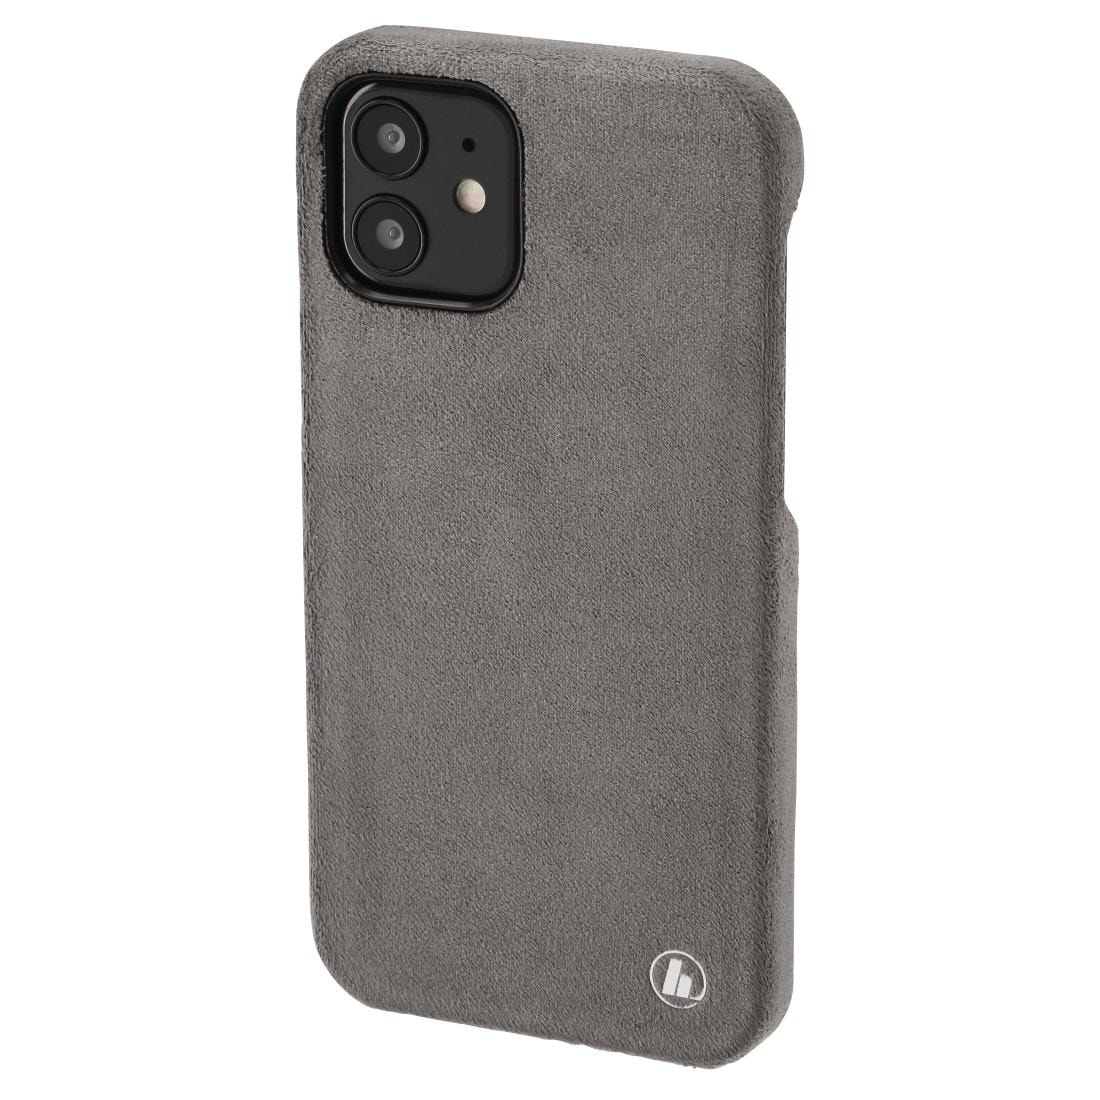 Hama Smartphone-Hülle »Cover "Finest Touch" für Apple iPhone 12, Apple iPhone 12 Pro«